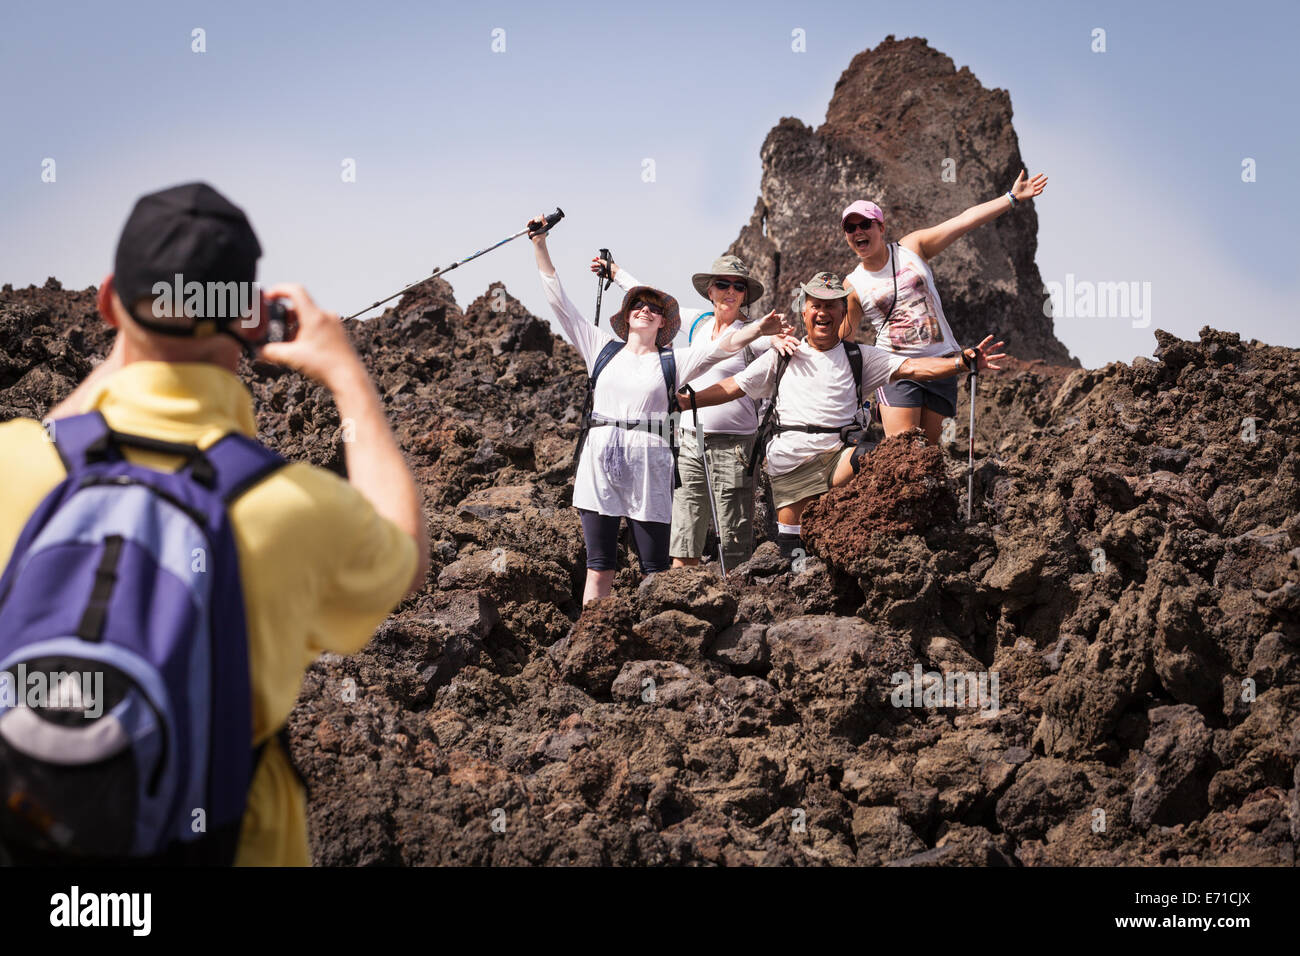 Group photo of walkers on the lava field from the 1909 eruption, Chinyero, Canary Islands, spain. Stock Photo